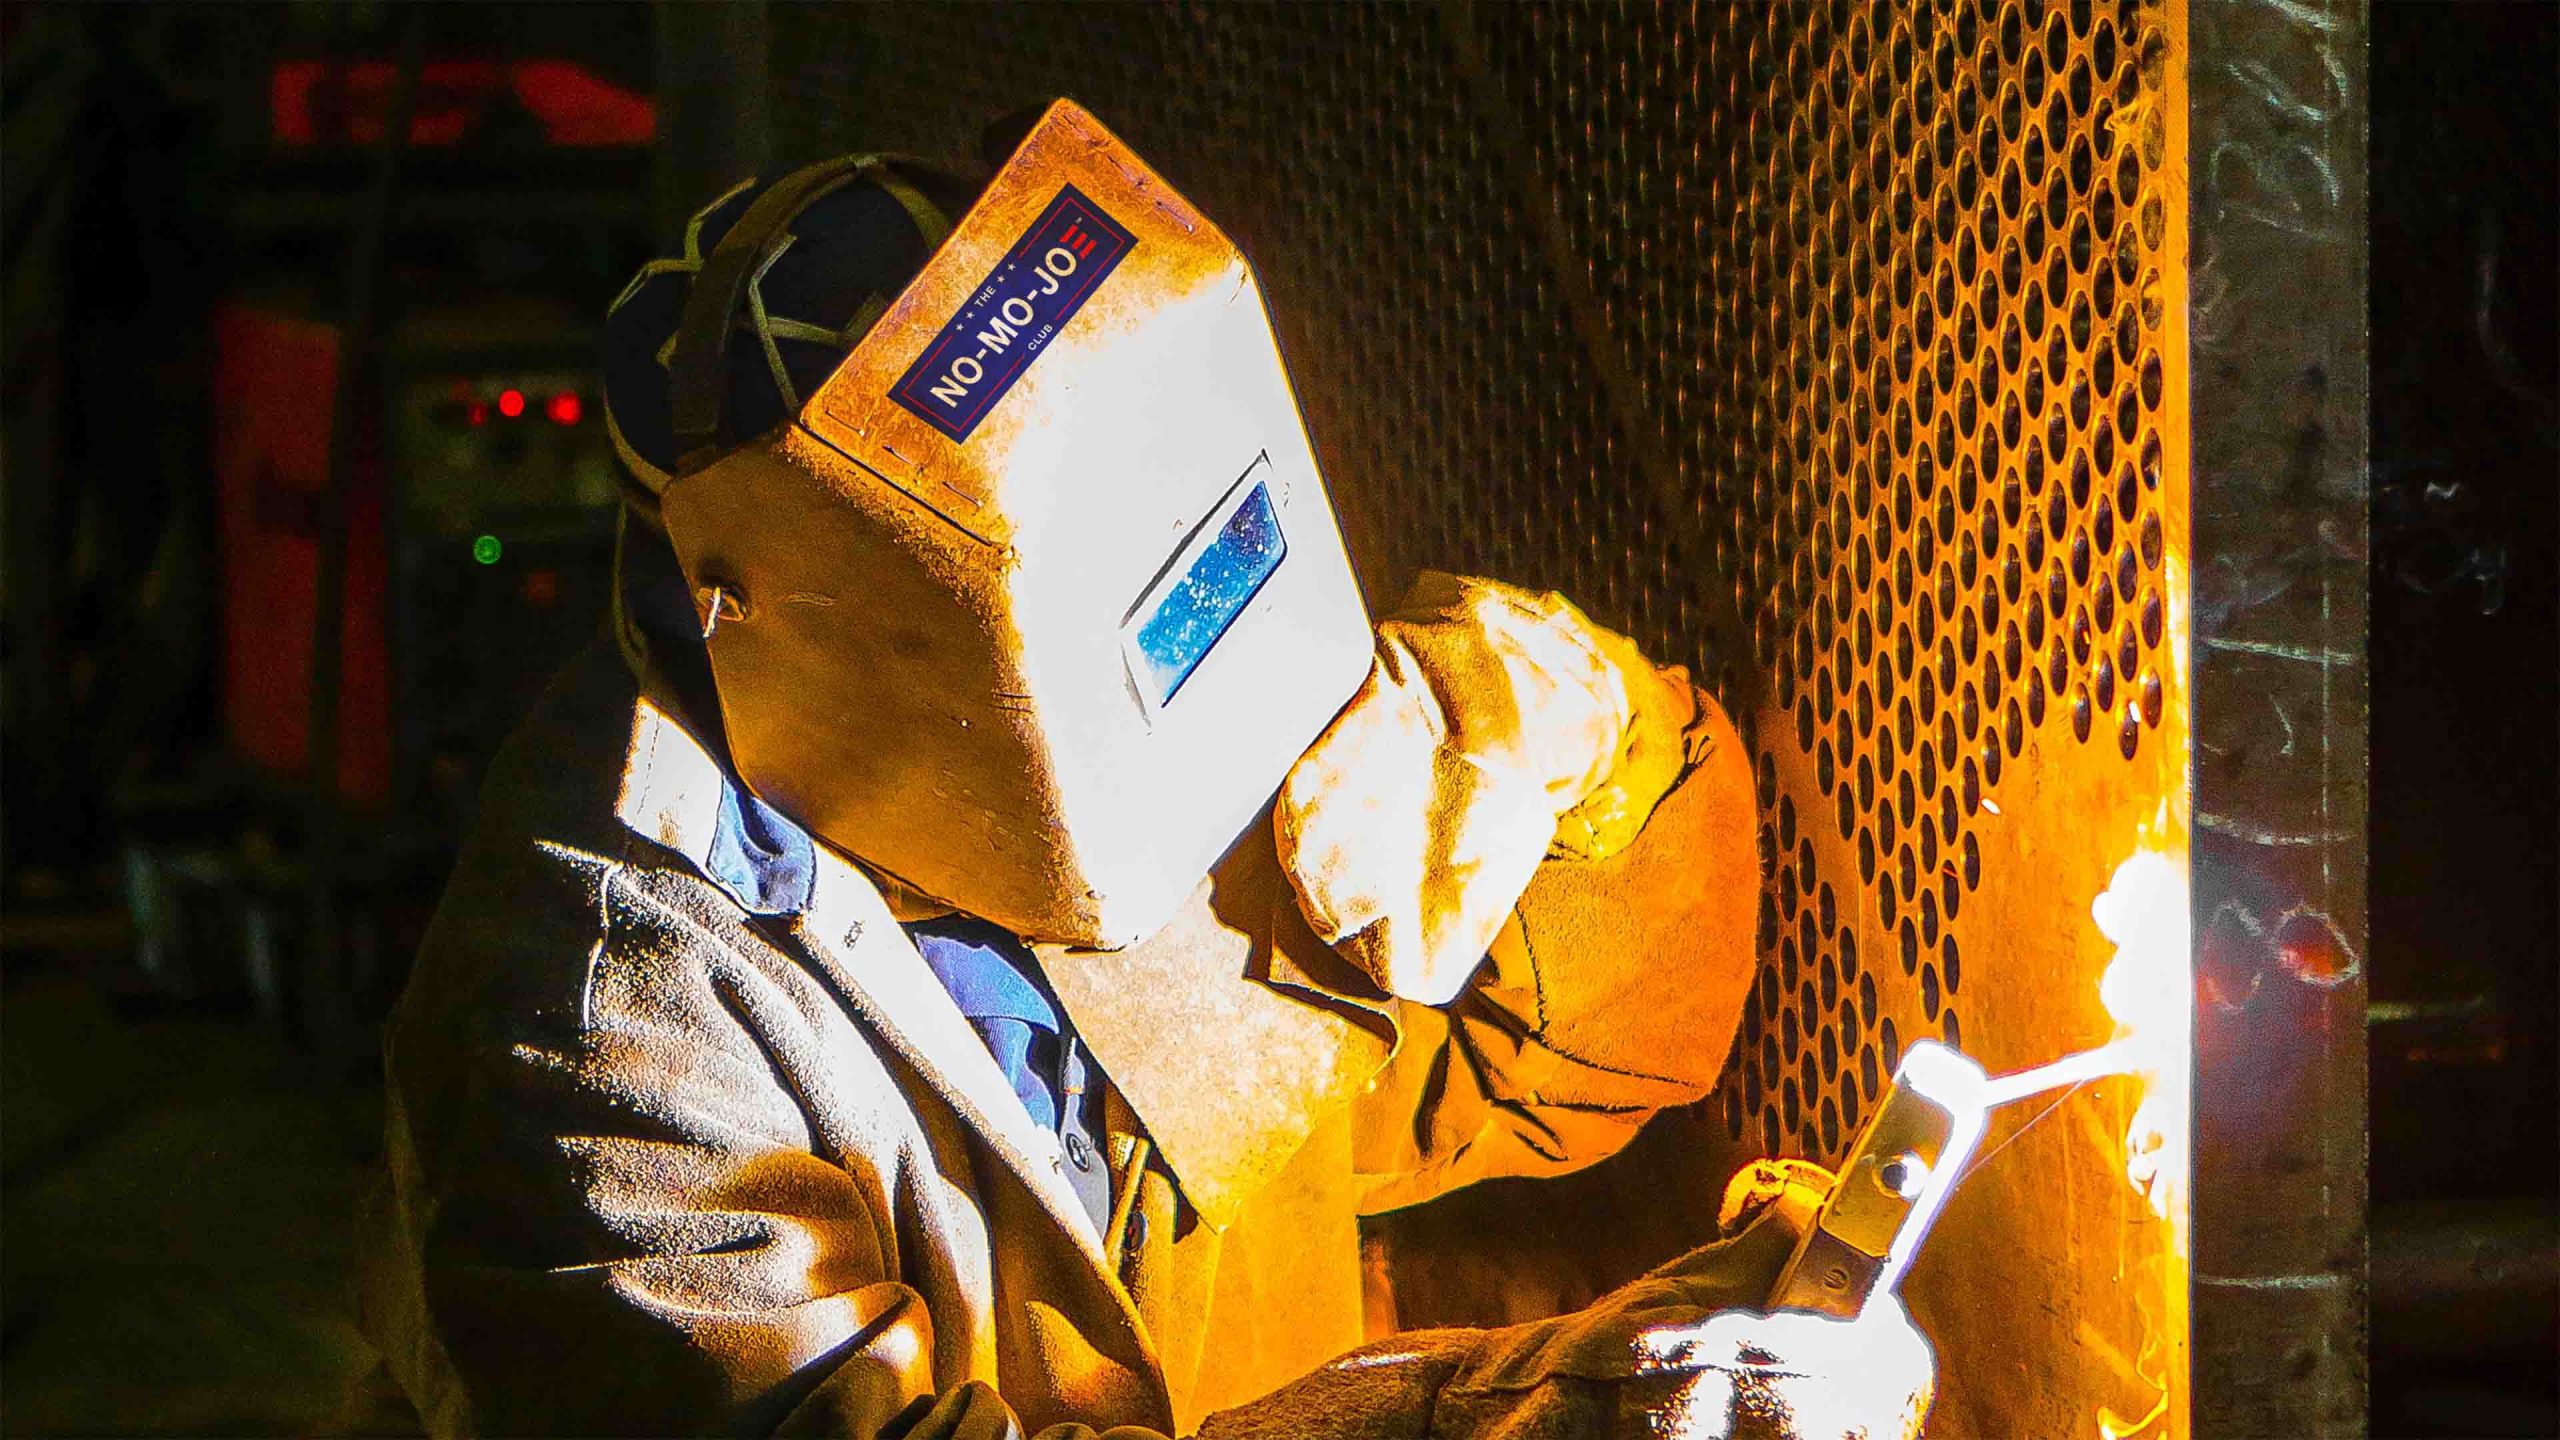 The No-Mo-Joe Club™ sticker on top of welders face shield as he works with sparks and flame